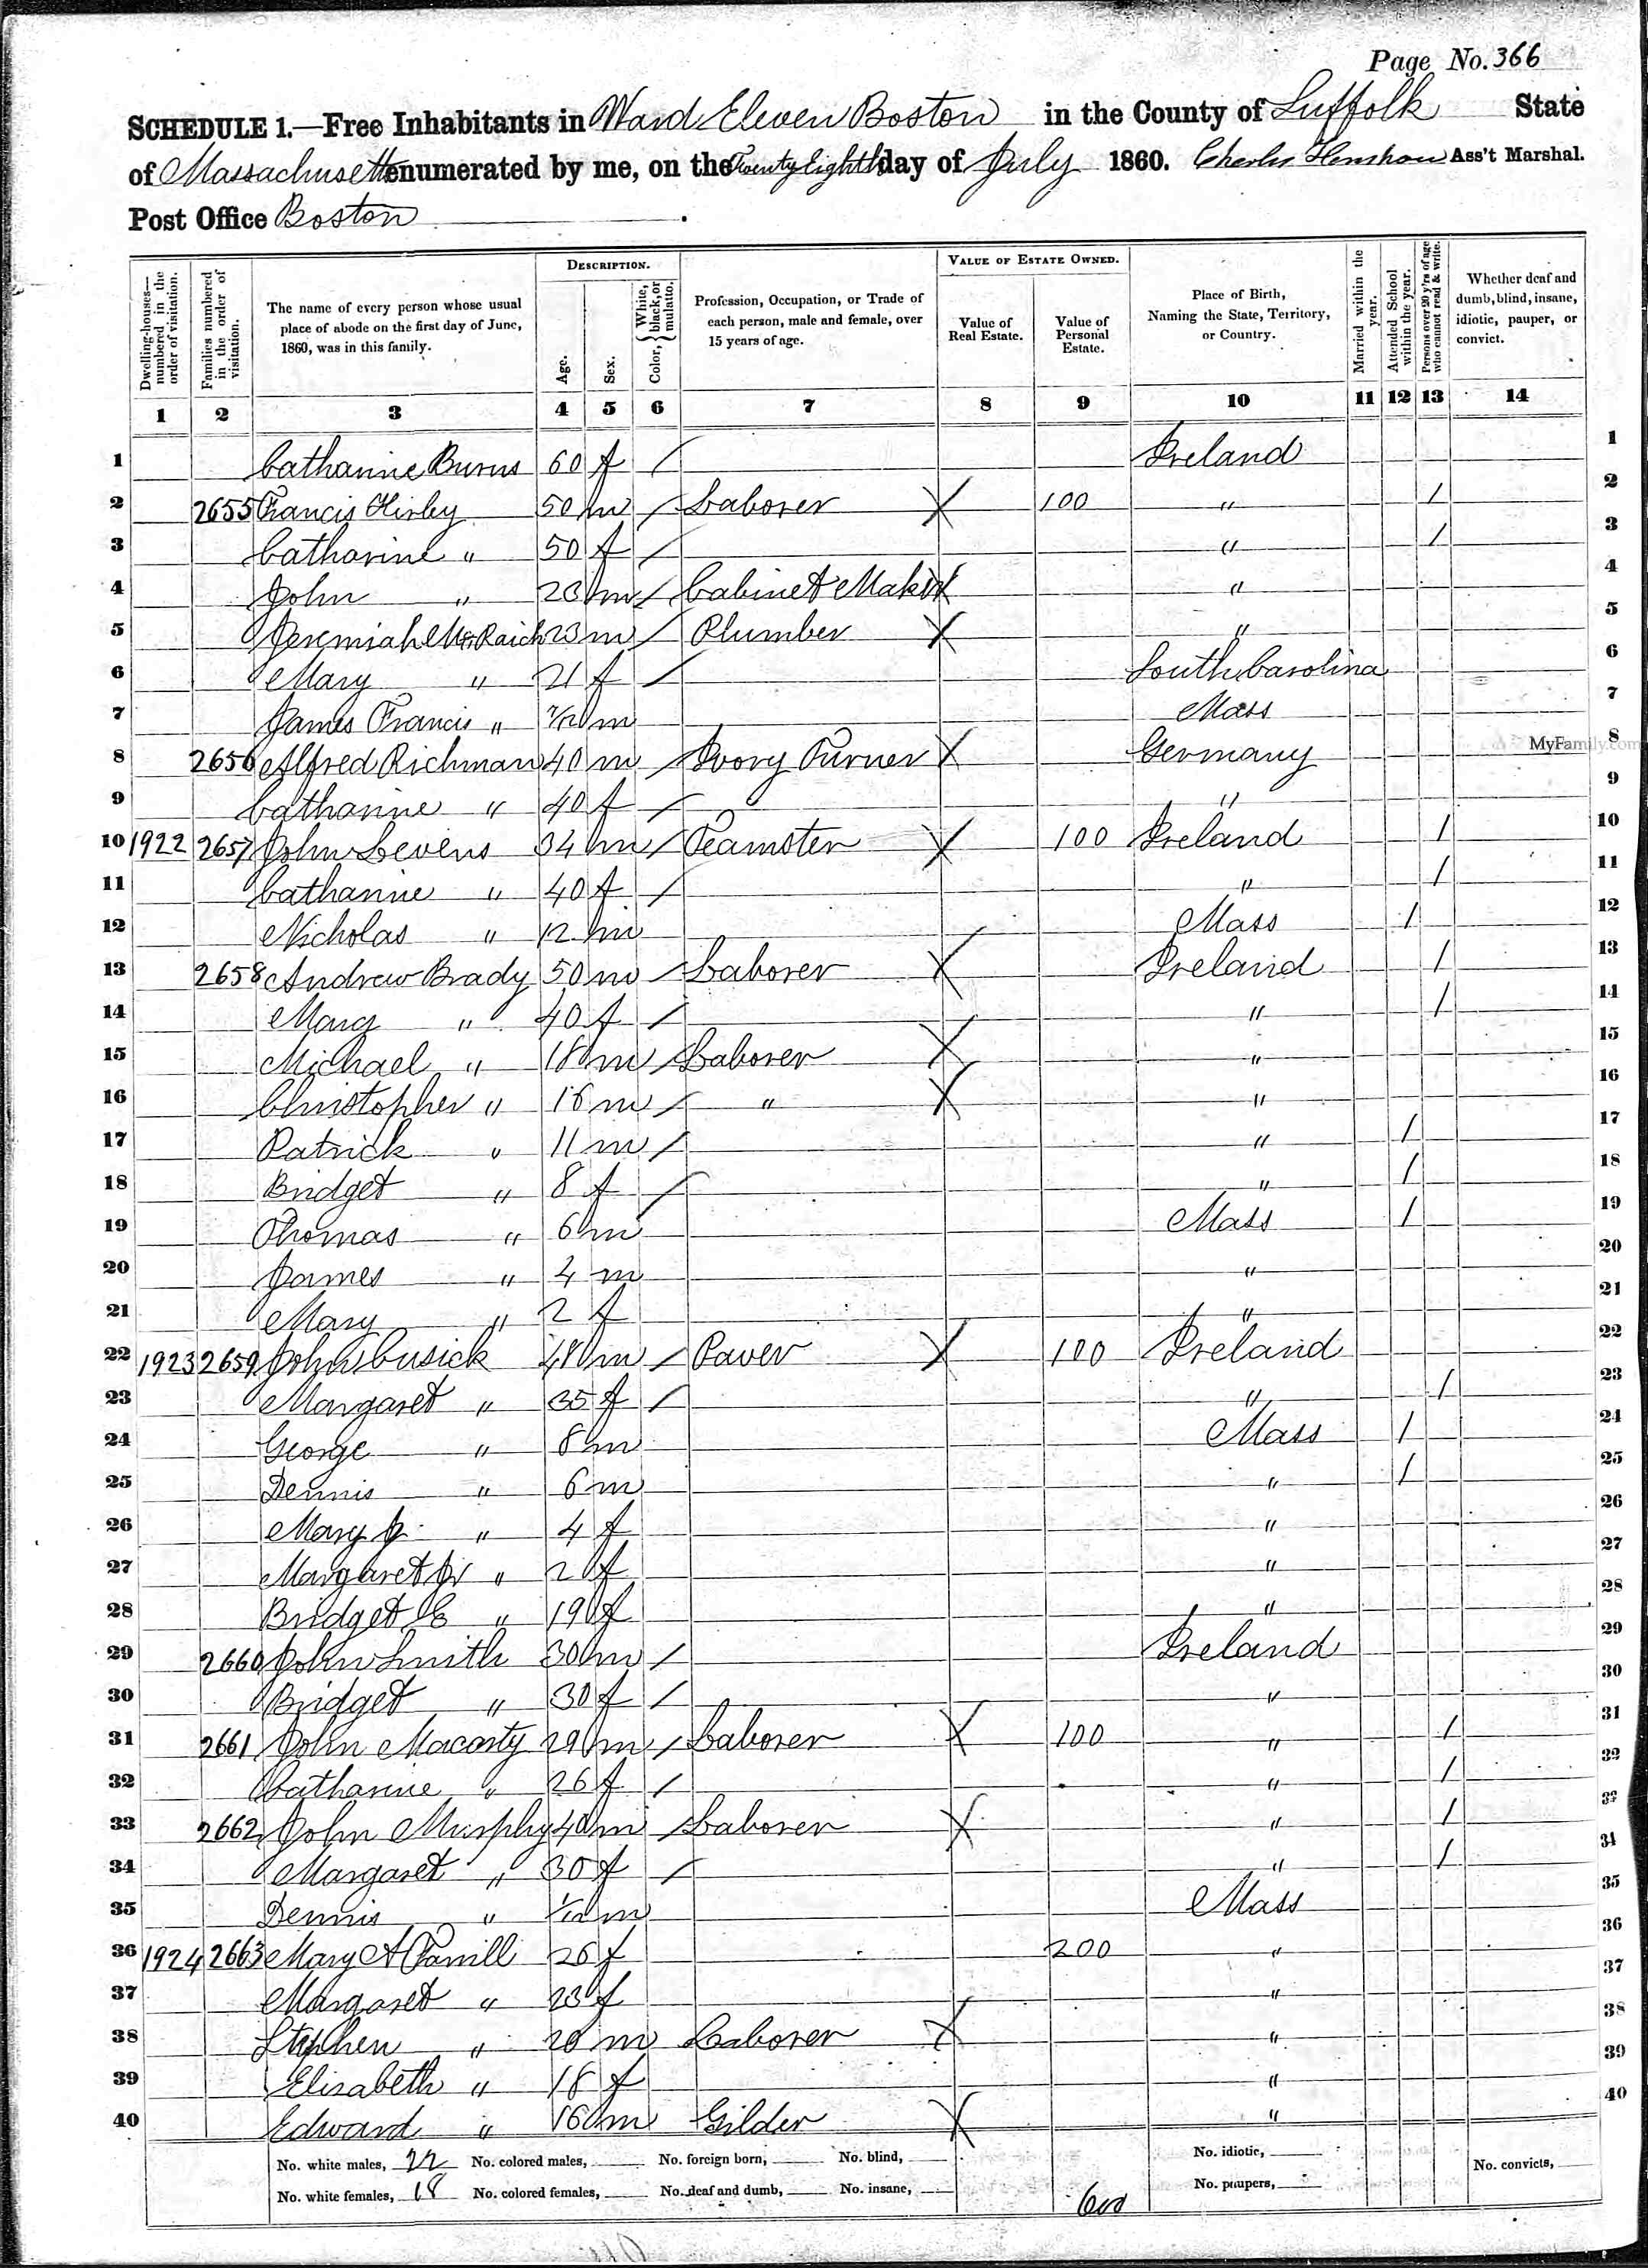 Image of an 1860 census page